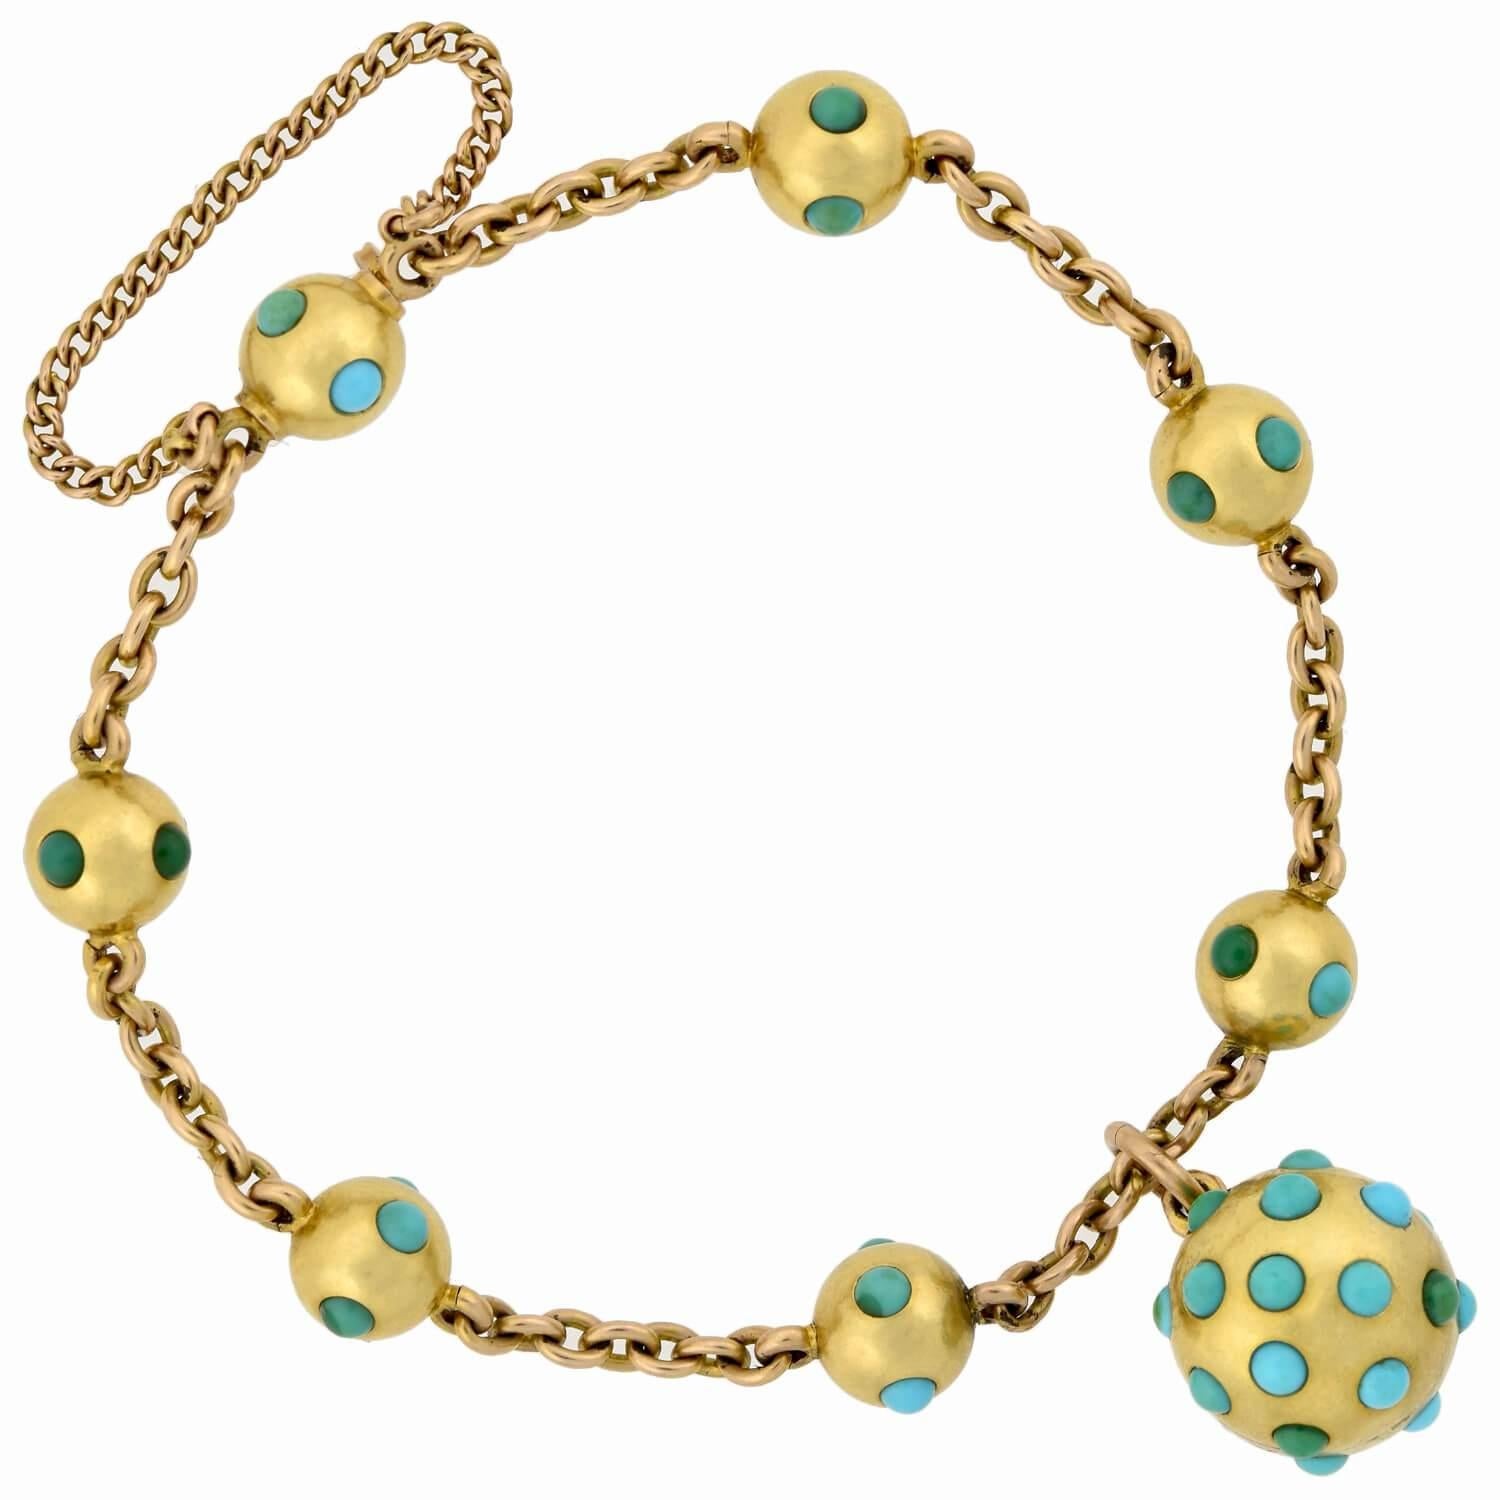 Women's Victorian Persian Turquoise Ball Link Bracelet with Locket Charm